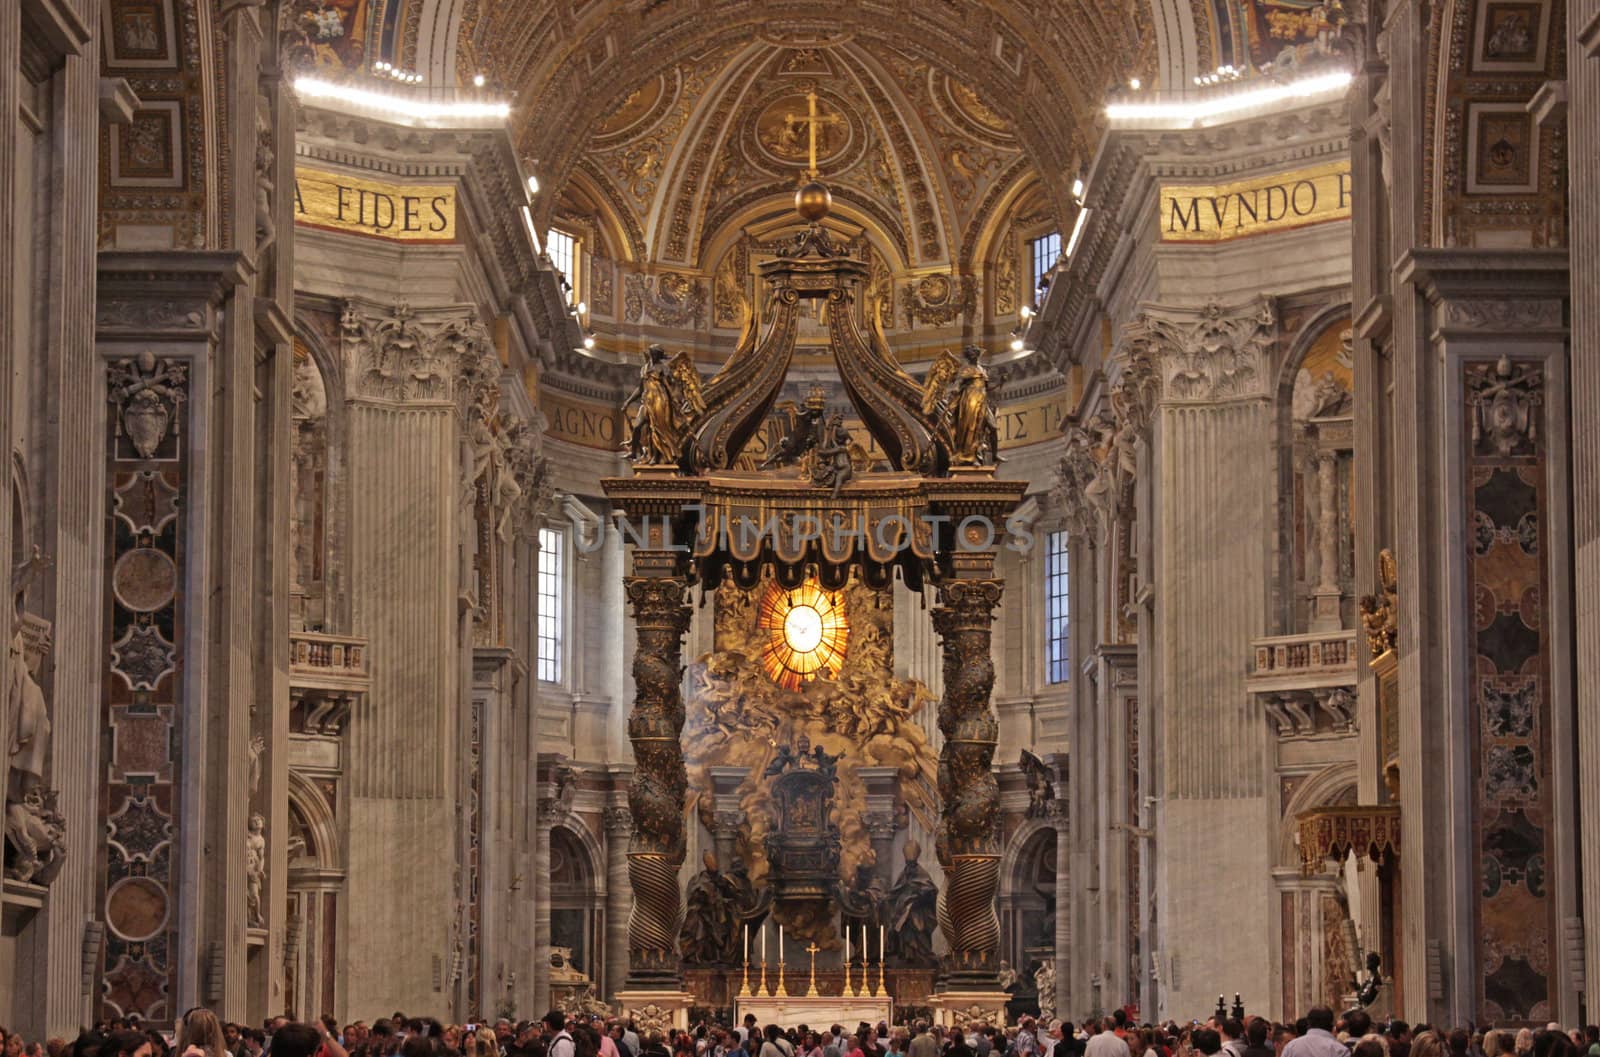 A wide angle shot of the main altar of St. Peter's Basilica, in Rome, Italy.
